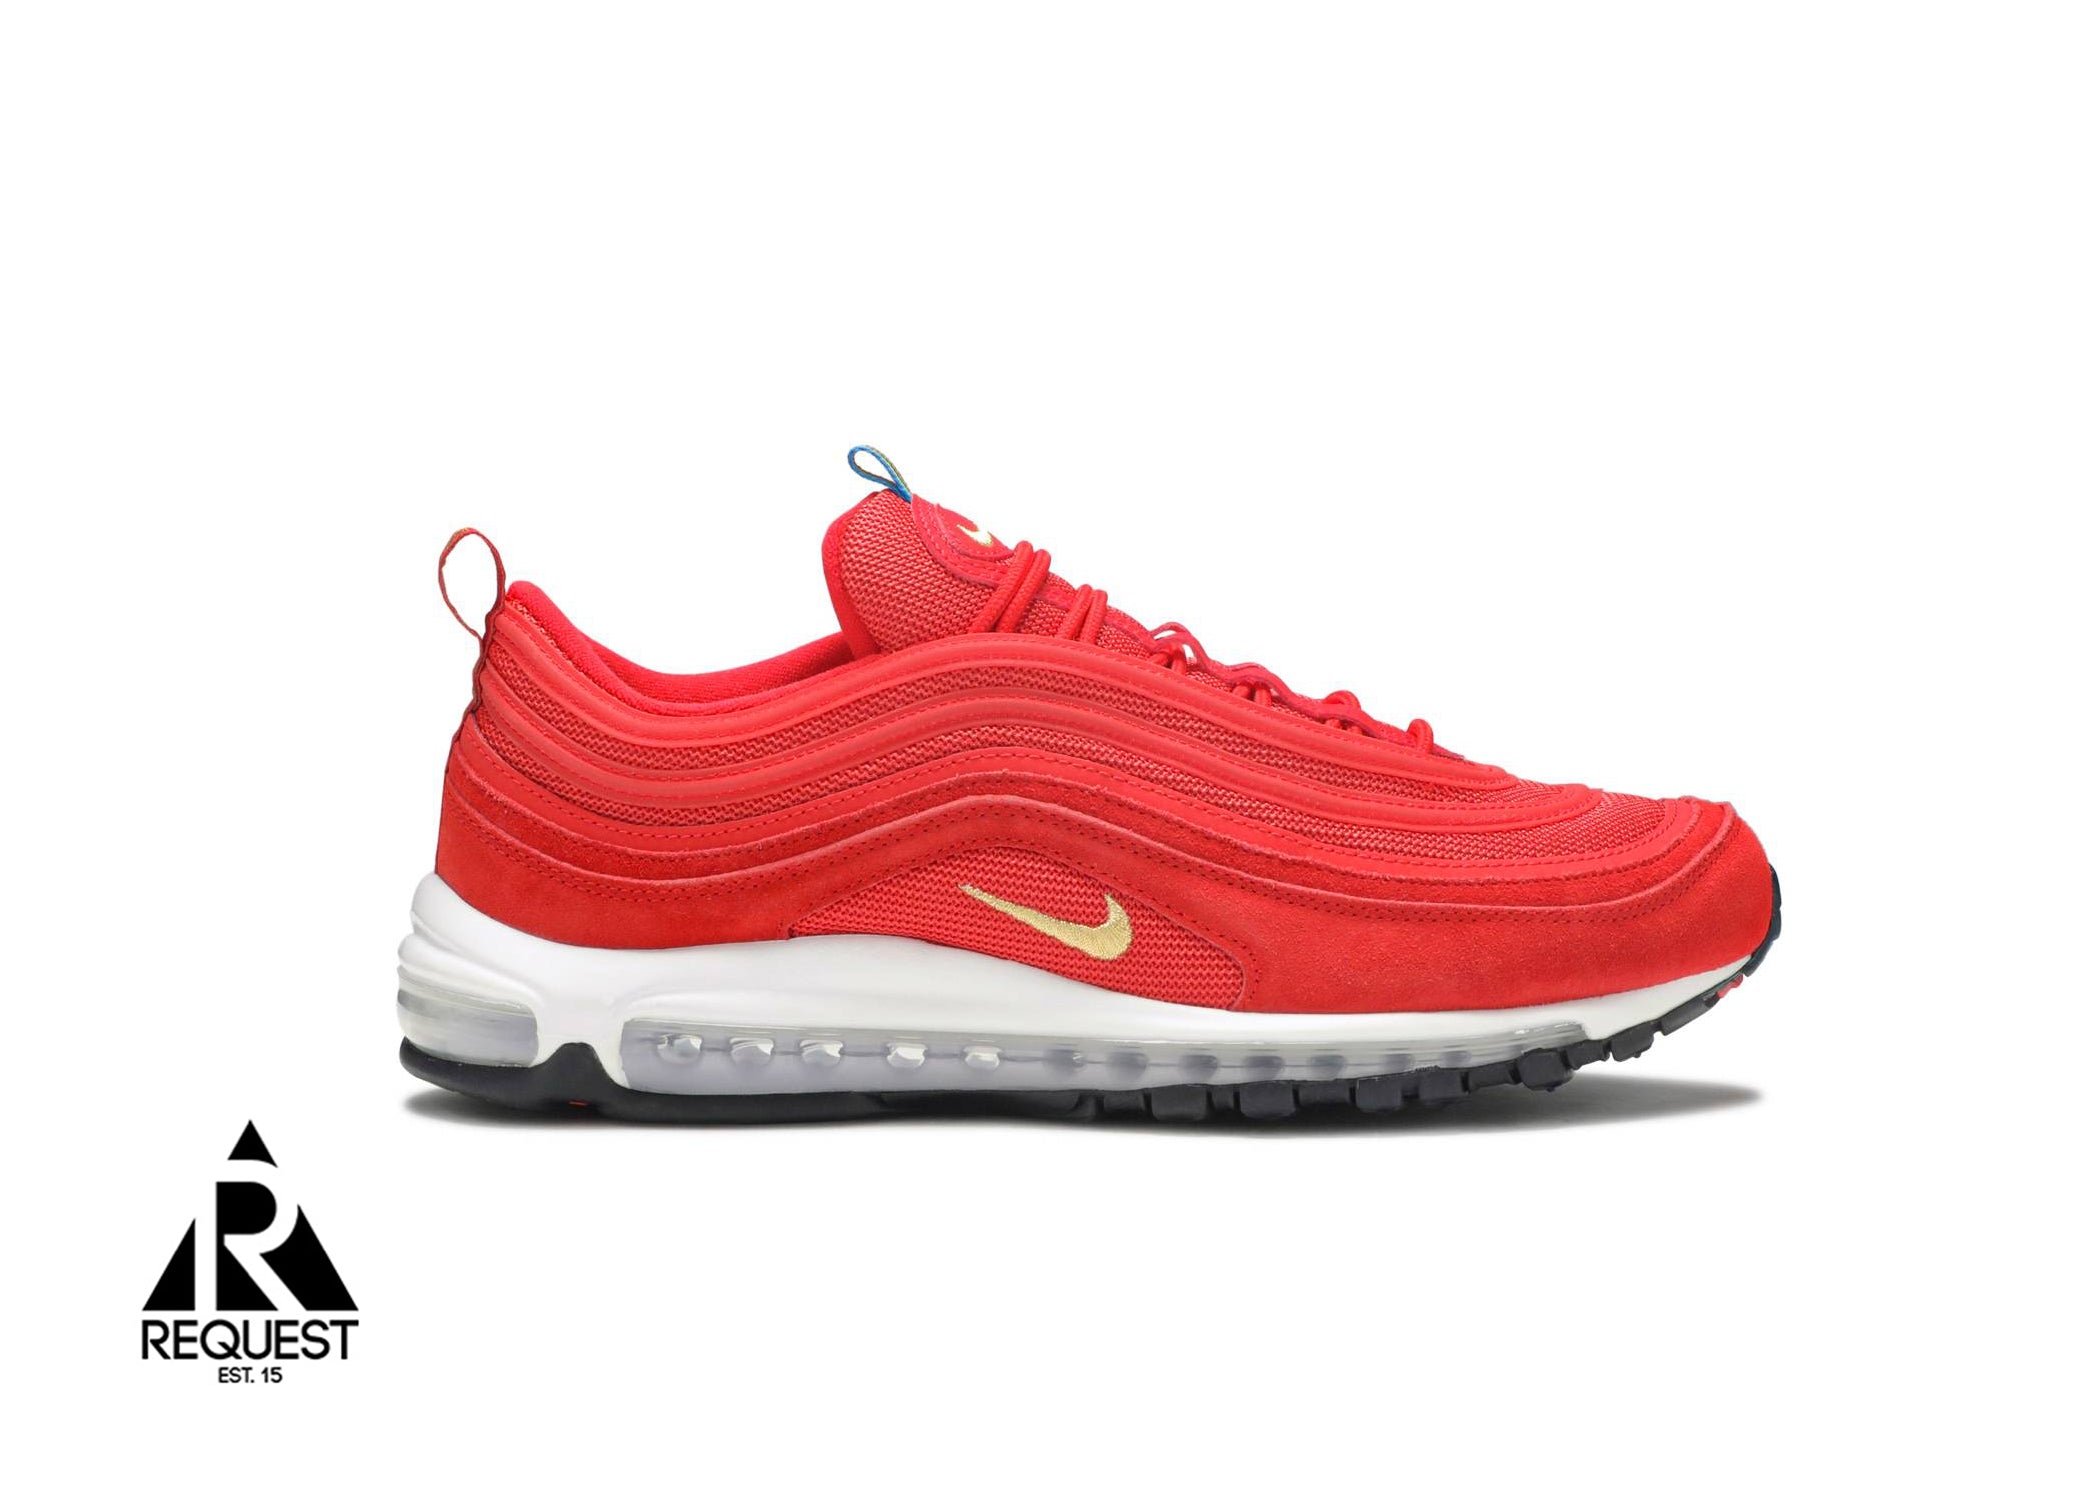 Air Max 97 “Olympic Rings Pack Red”